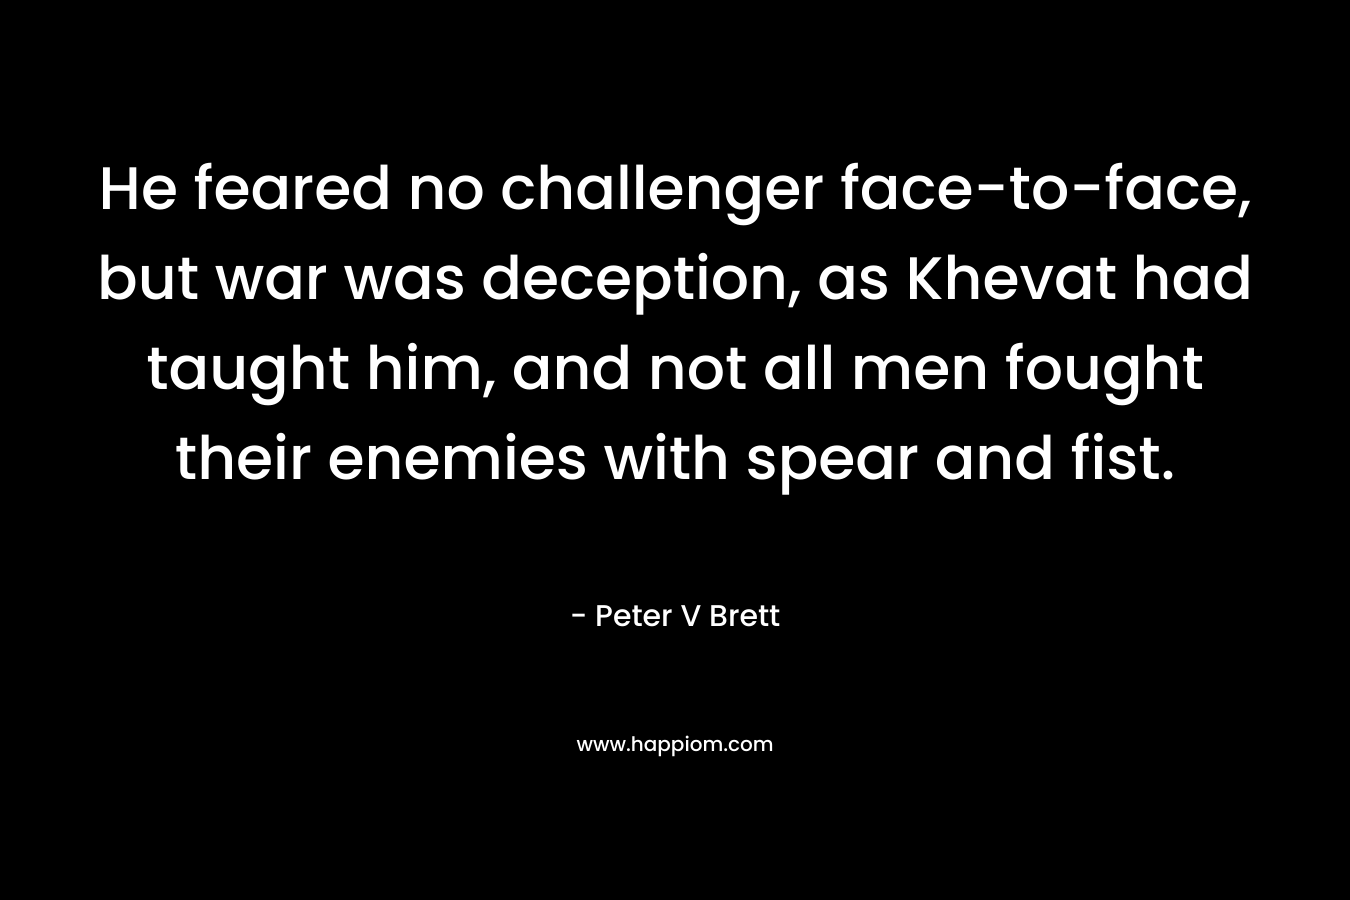 He feared no challenger face-to-face, but war was deception, as Khevat had taught him, and not all men fought their enemies with spear and fist. – Peter V Brett